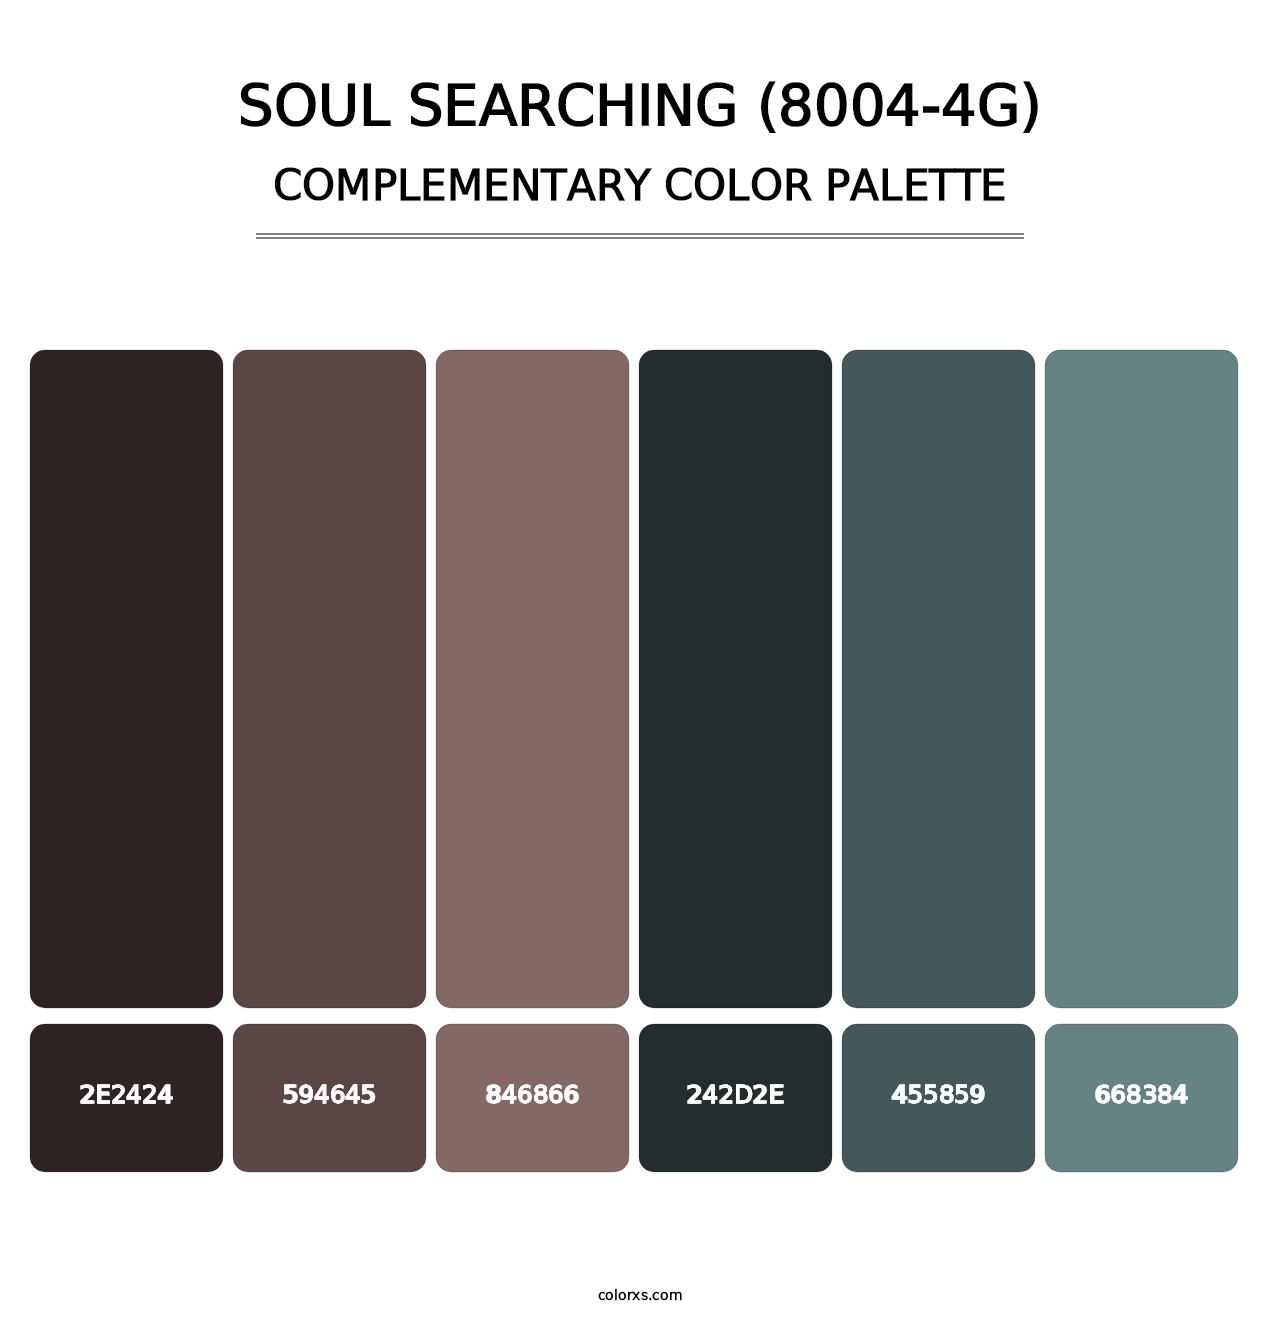 Soul Searching (8004-4G) - Complementary Color Palette